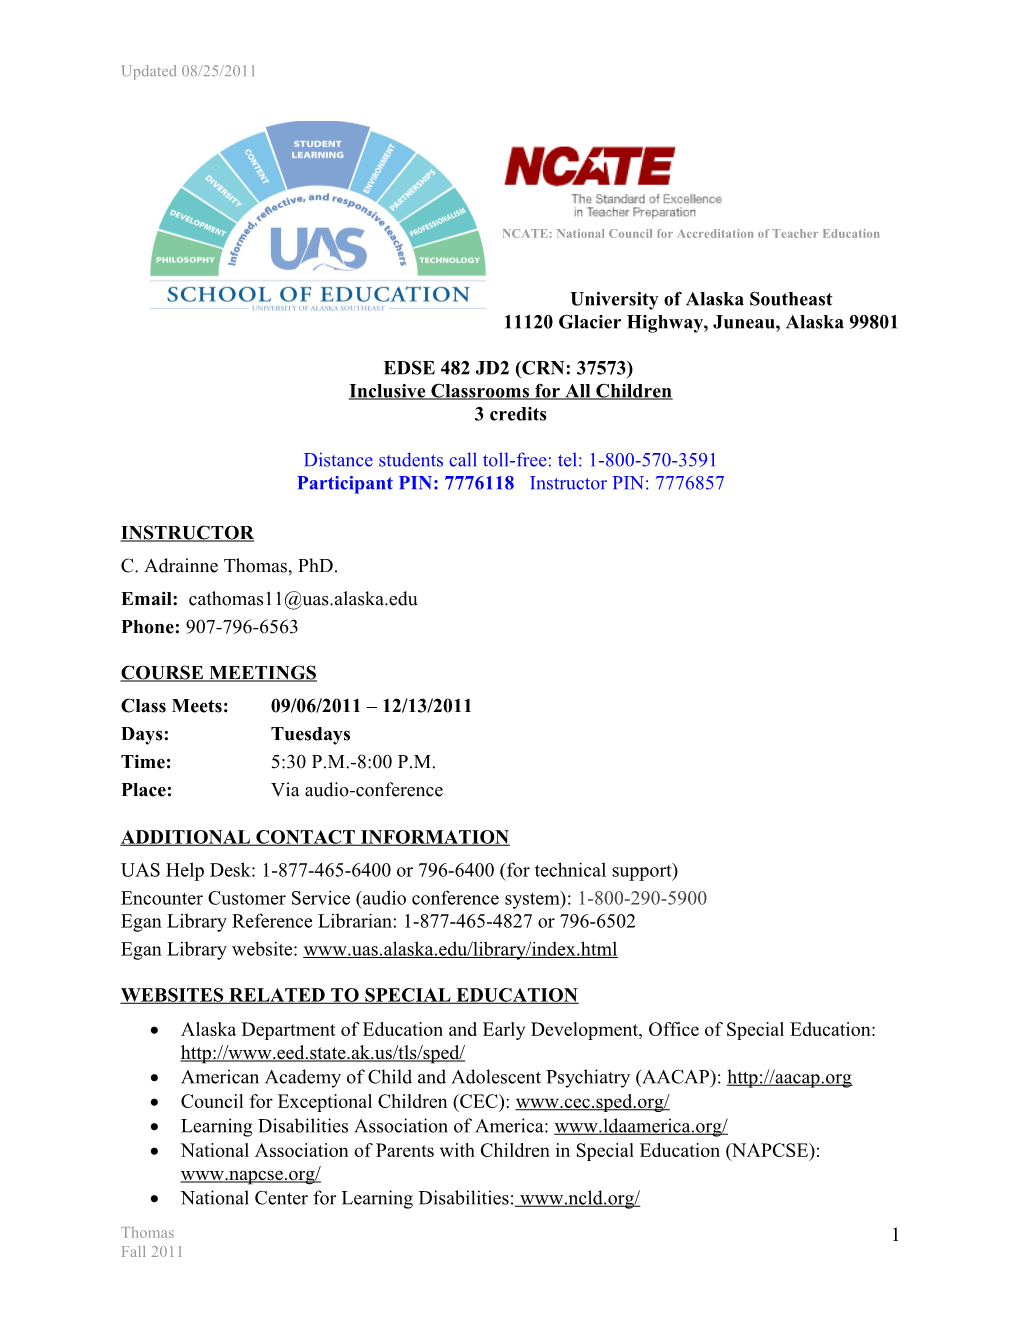 NCATE: National Council for Accreditation of Teacher Education